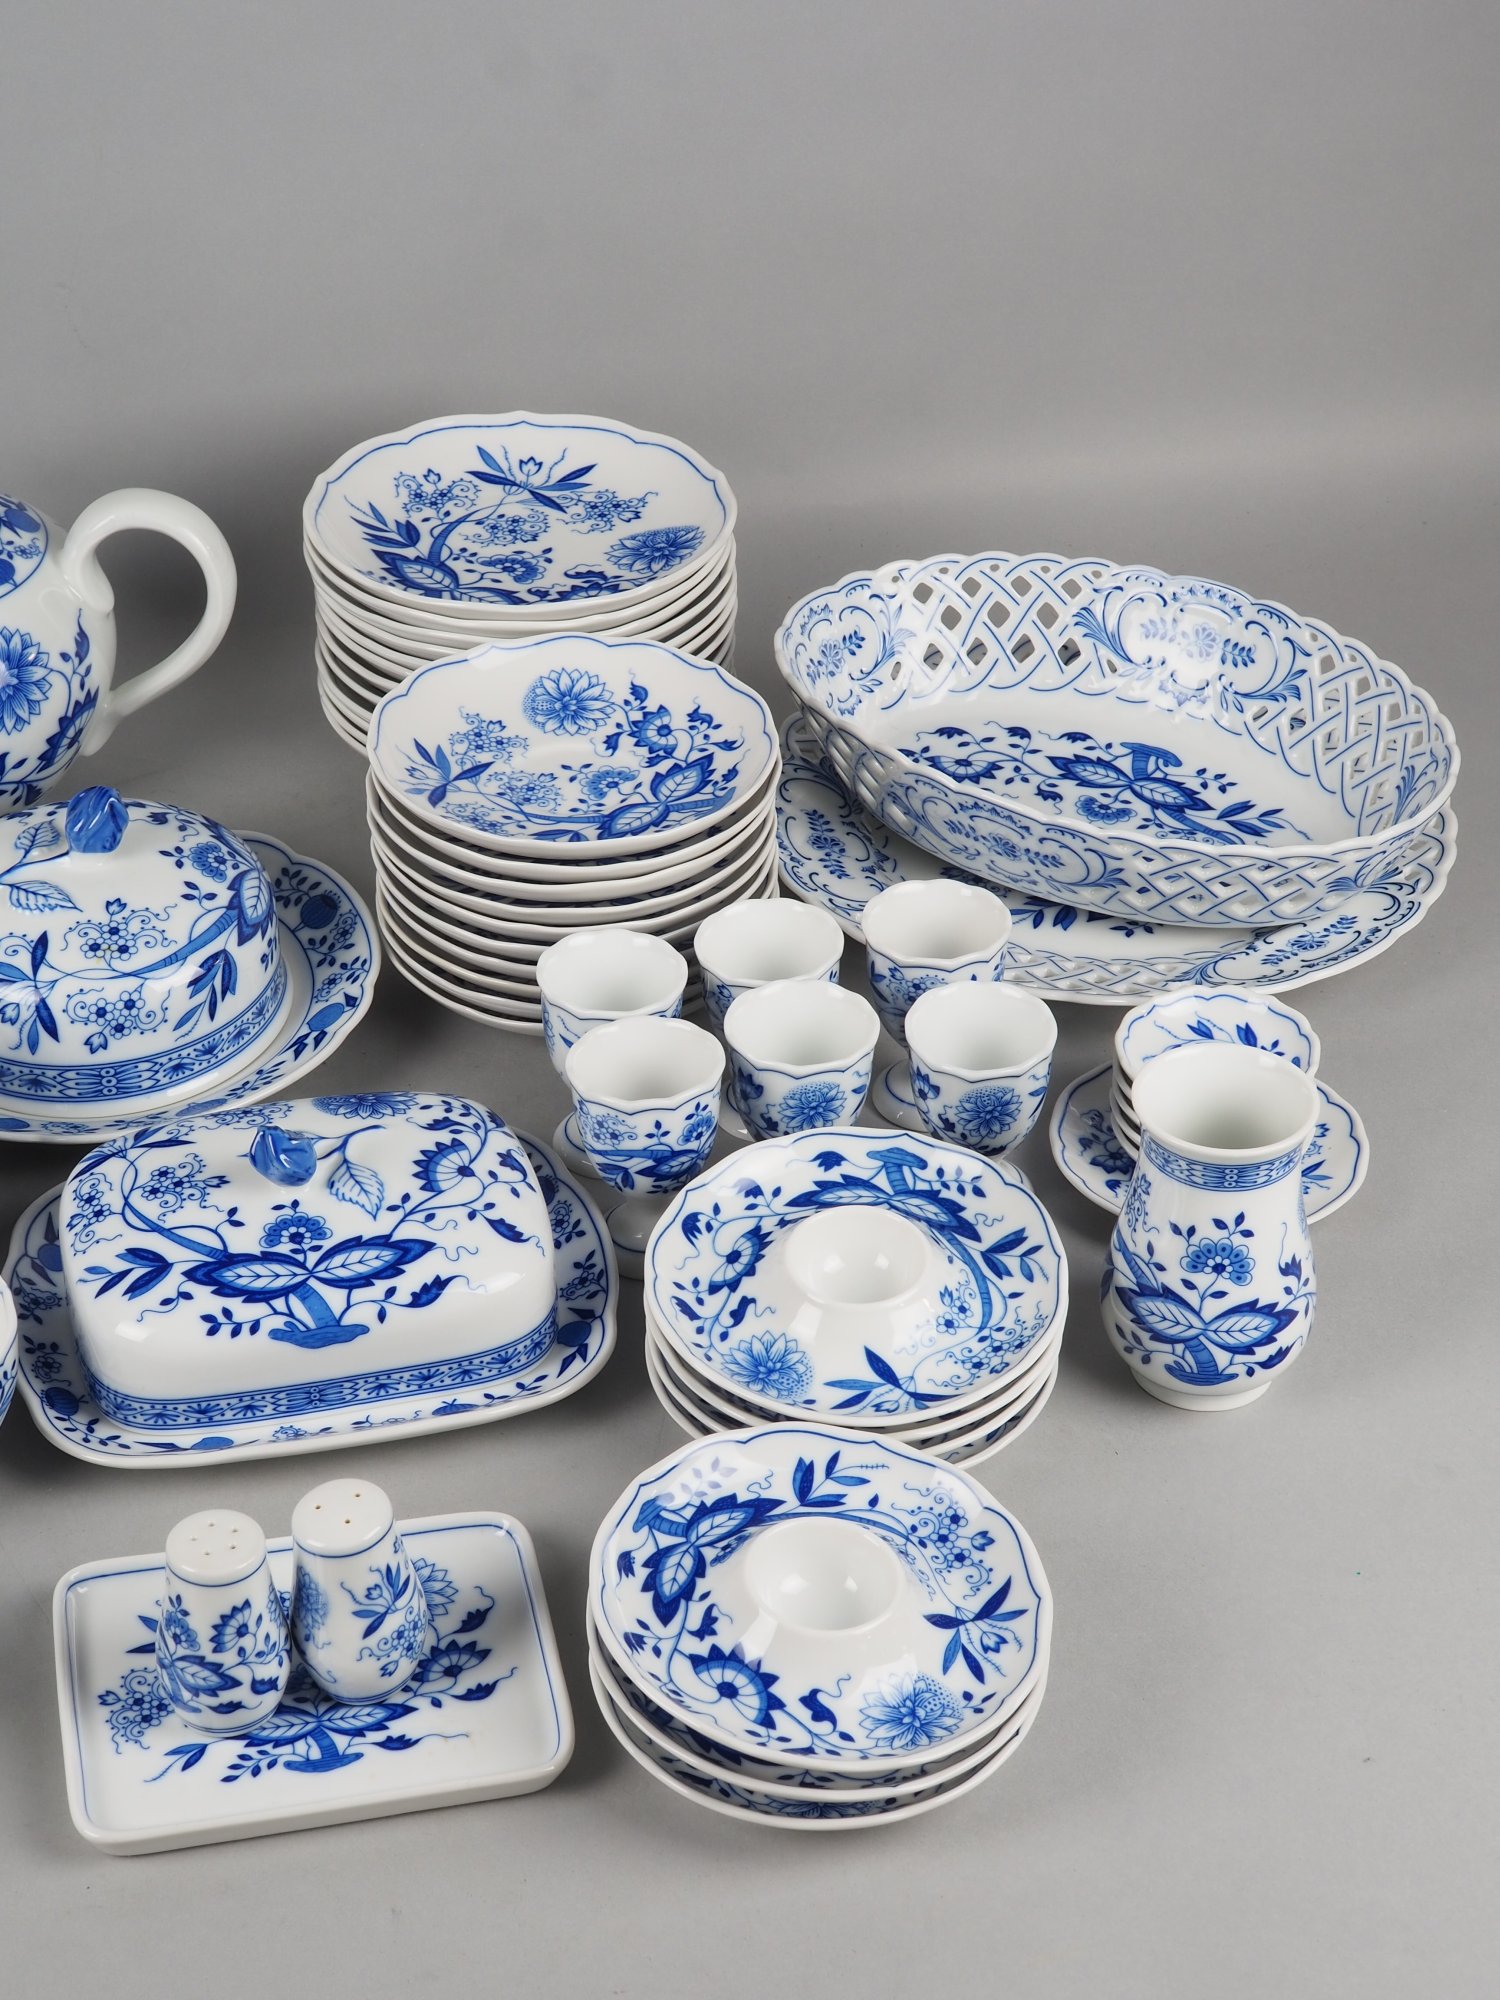 Hutschenreuther, Extensive breakfast service, 68 pieces, 2nd half of 20th century. - Image 3 of 4